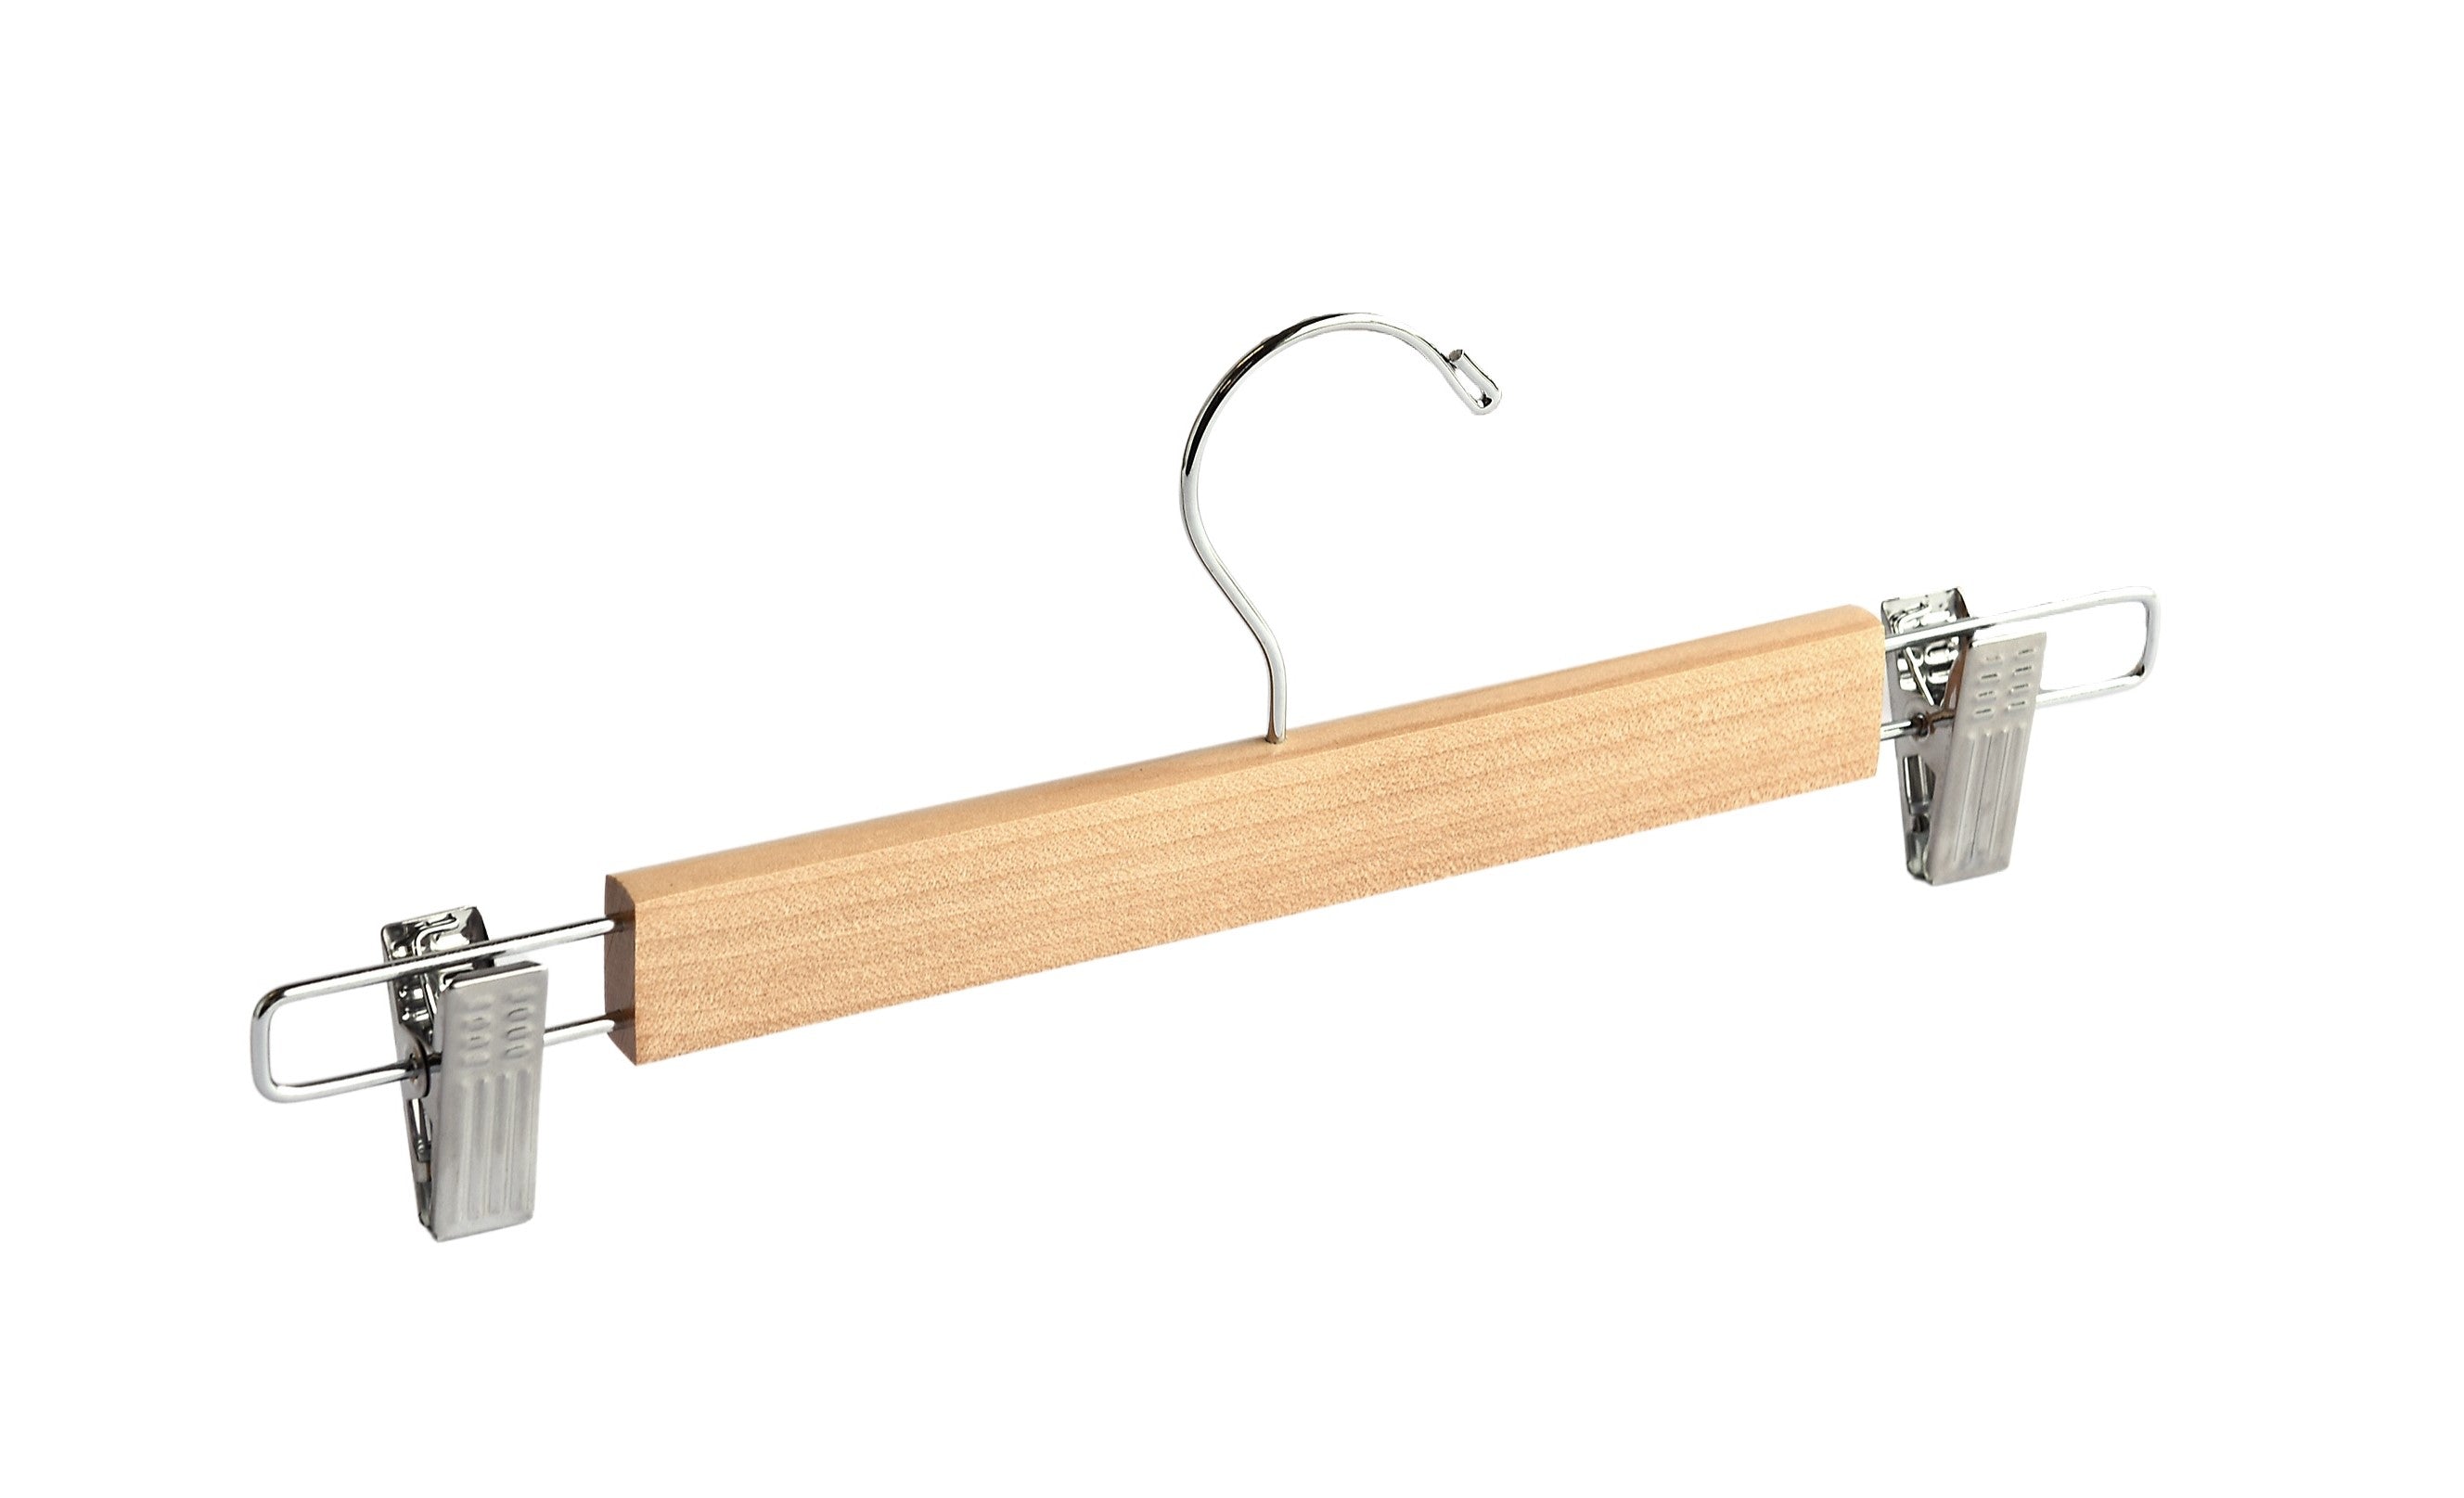 Natural Wooden Top & Side Clip Bottom Hangers Mix